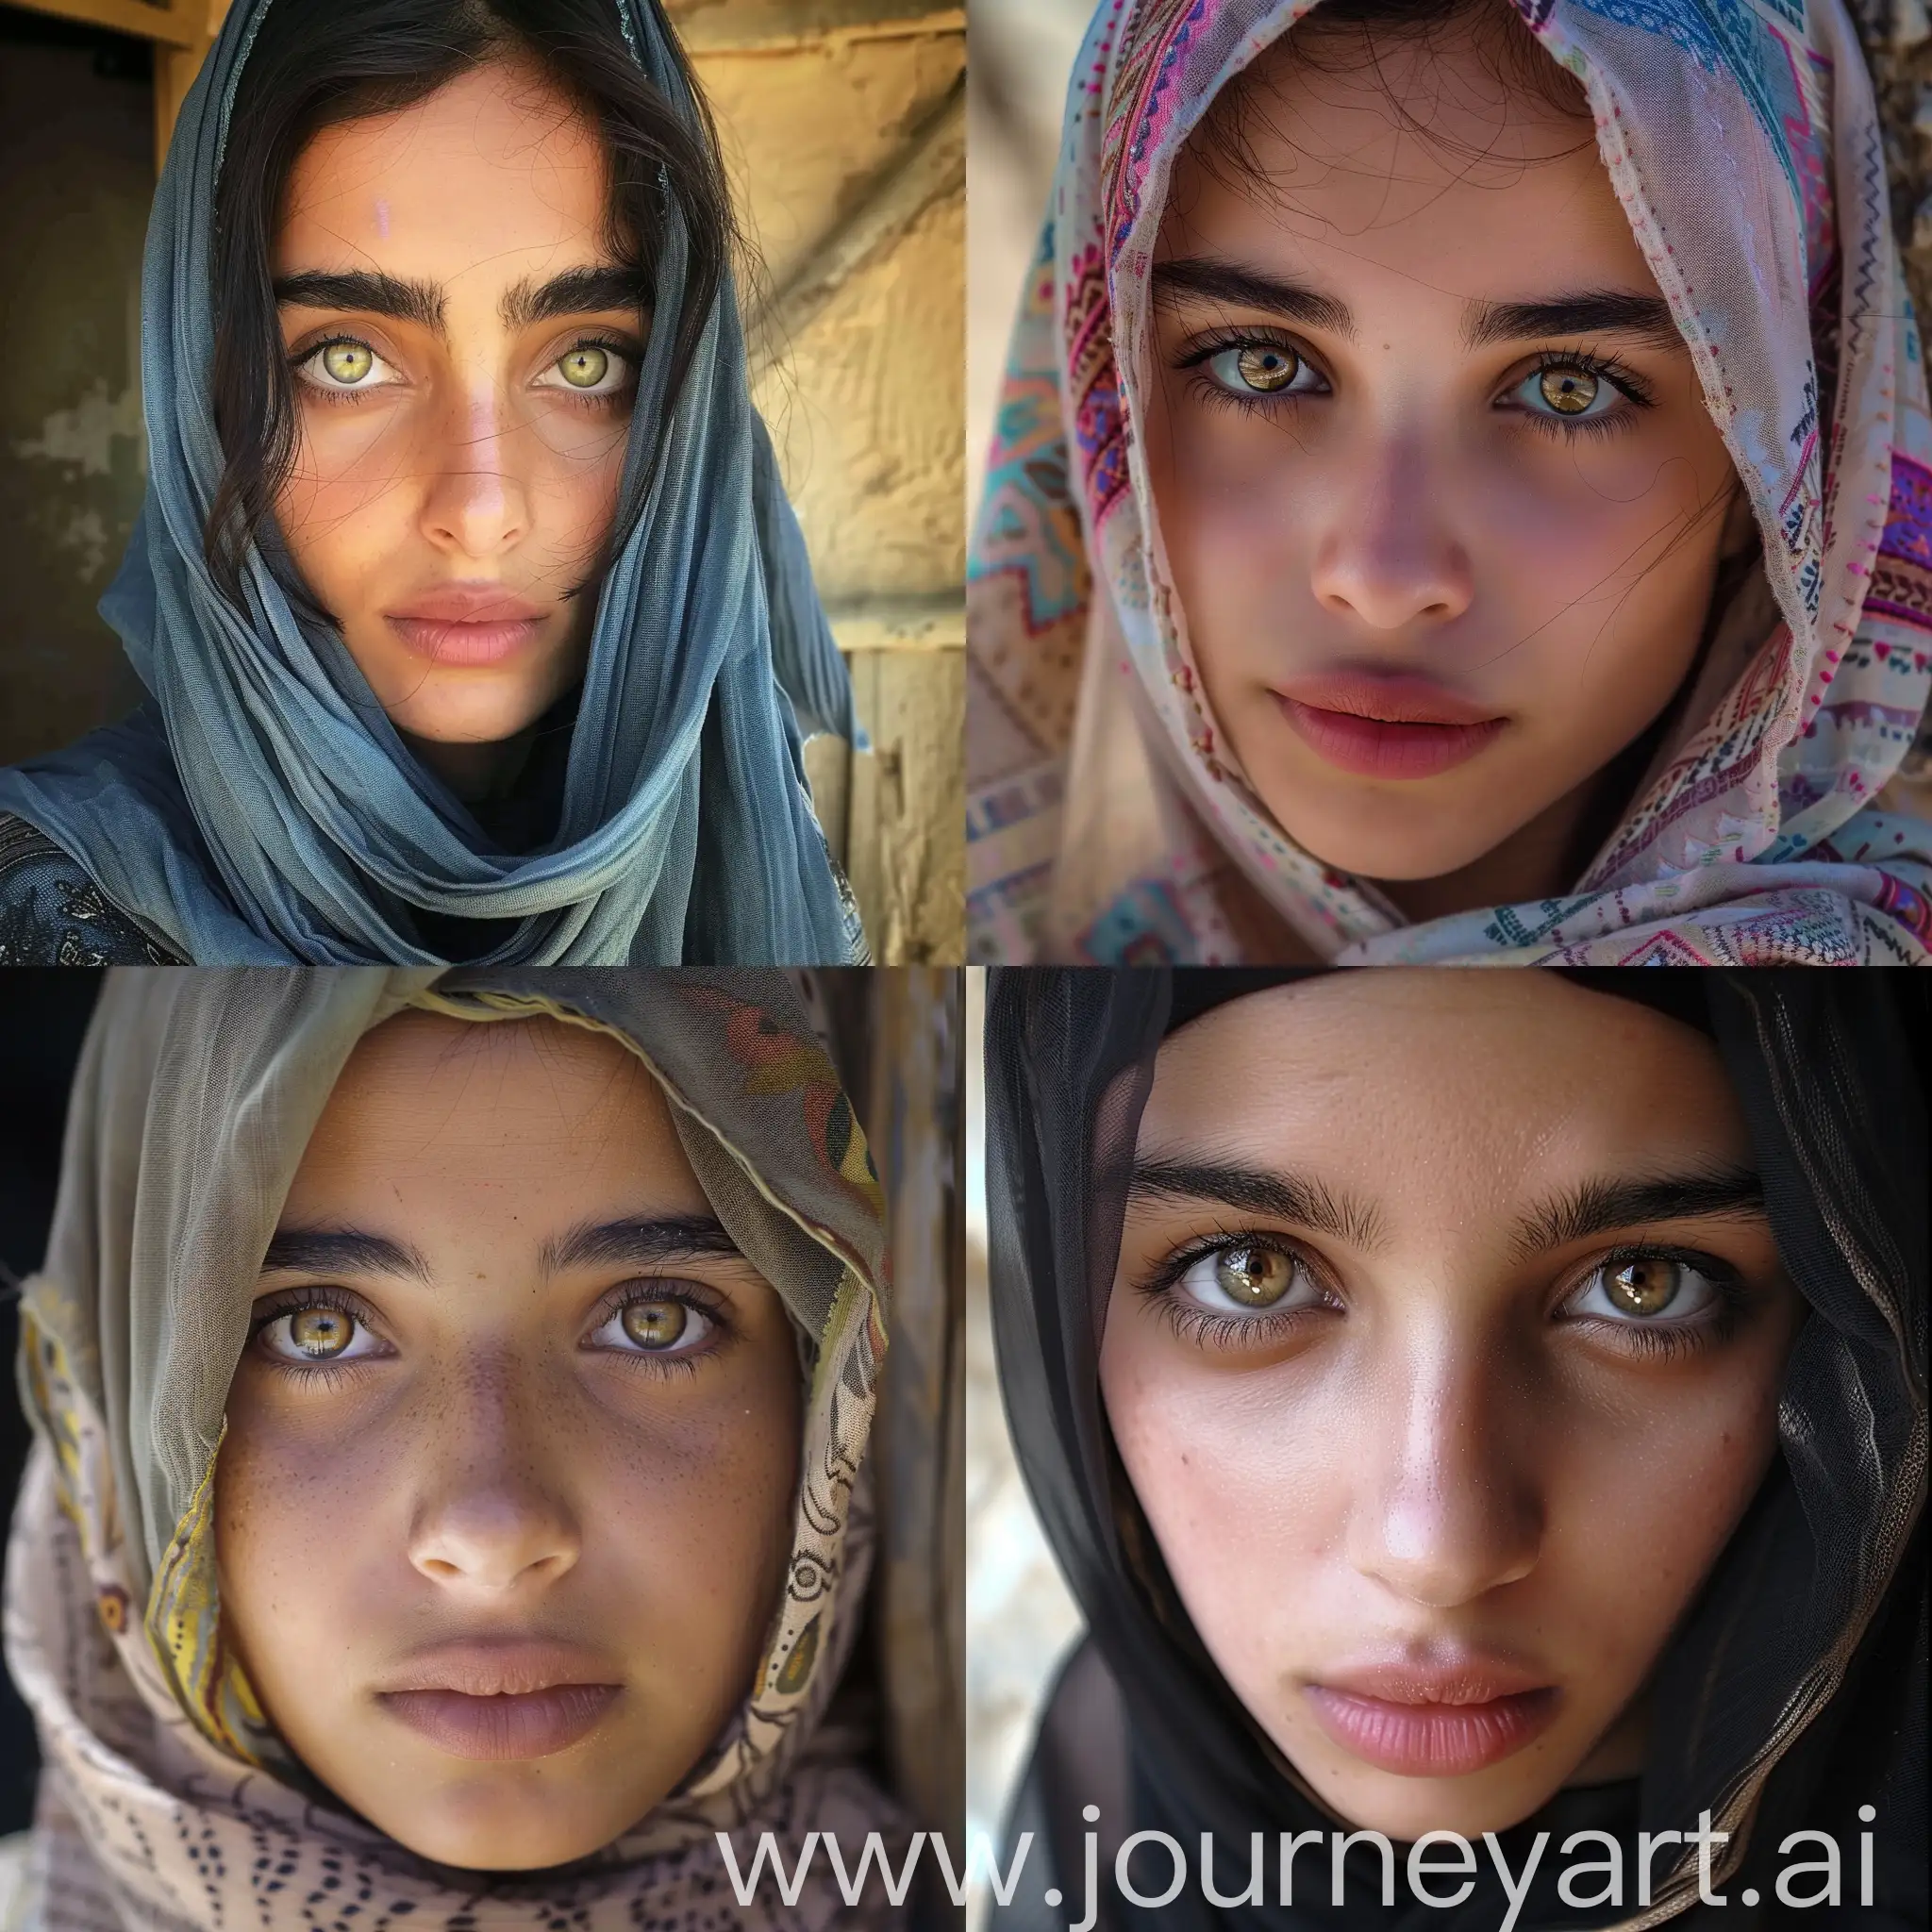 Innocent-Egyptian-Girl-with-Beautiful-Eyes